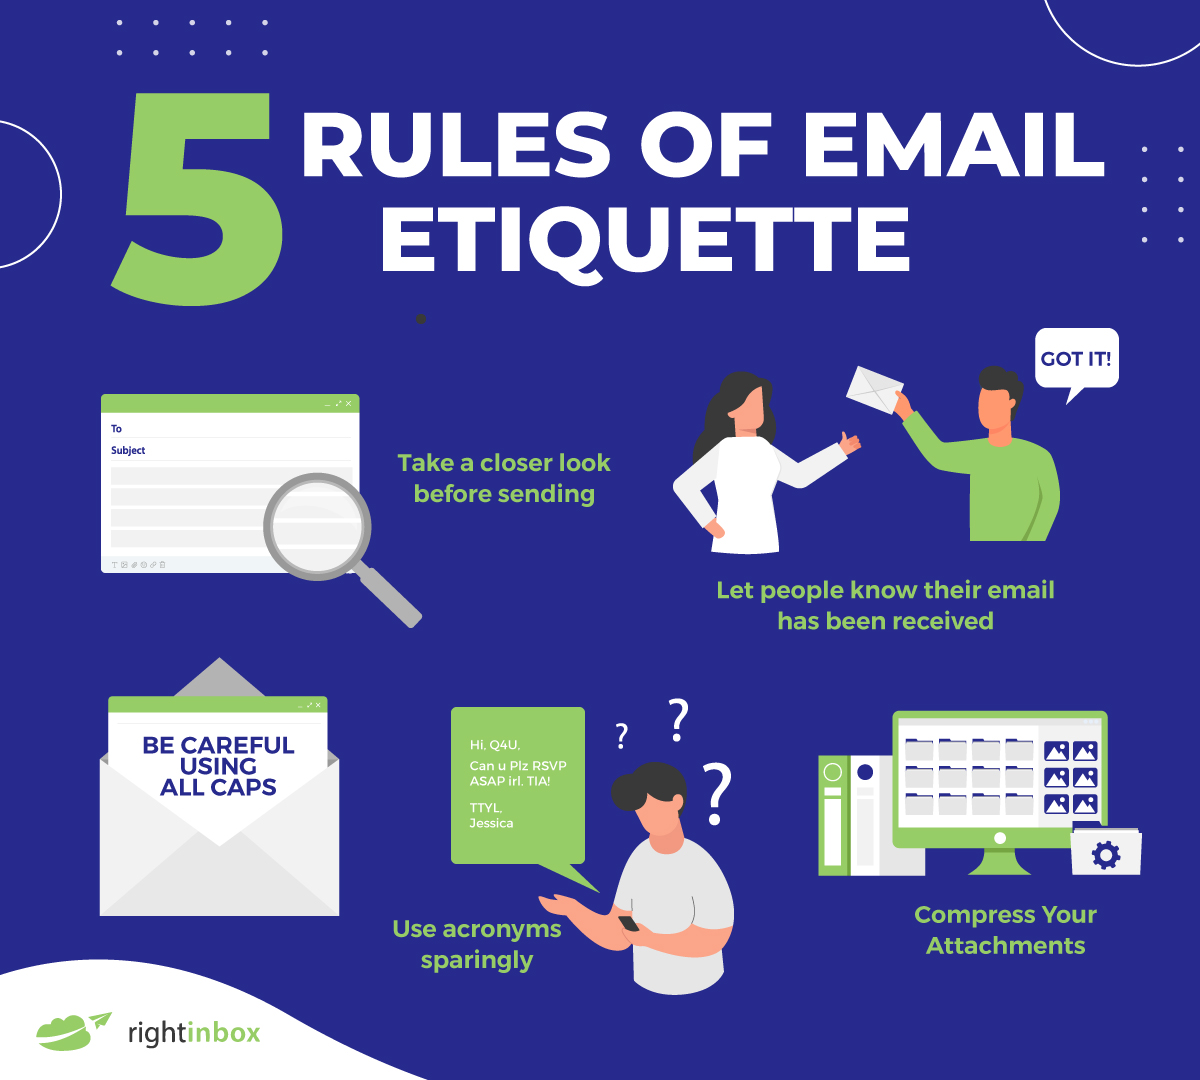 5 rules of email etiquette